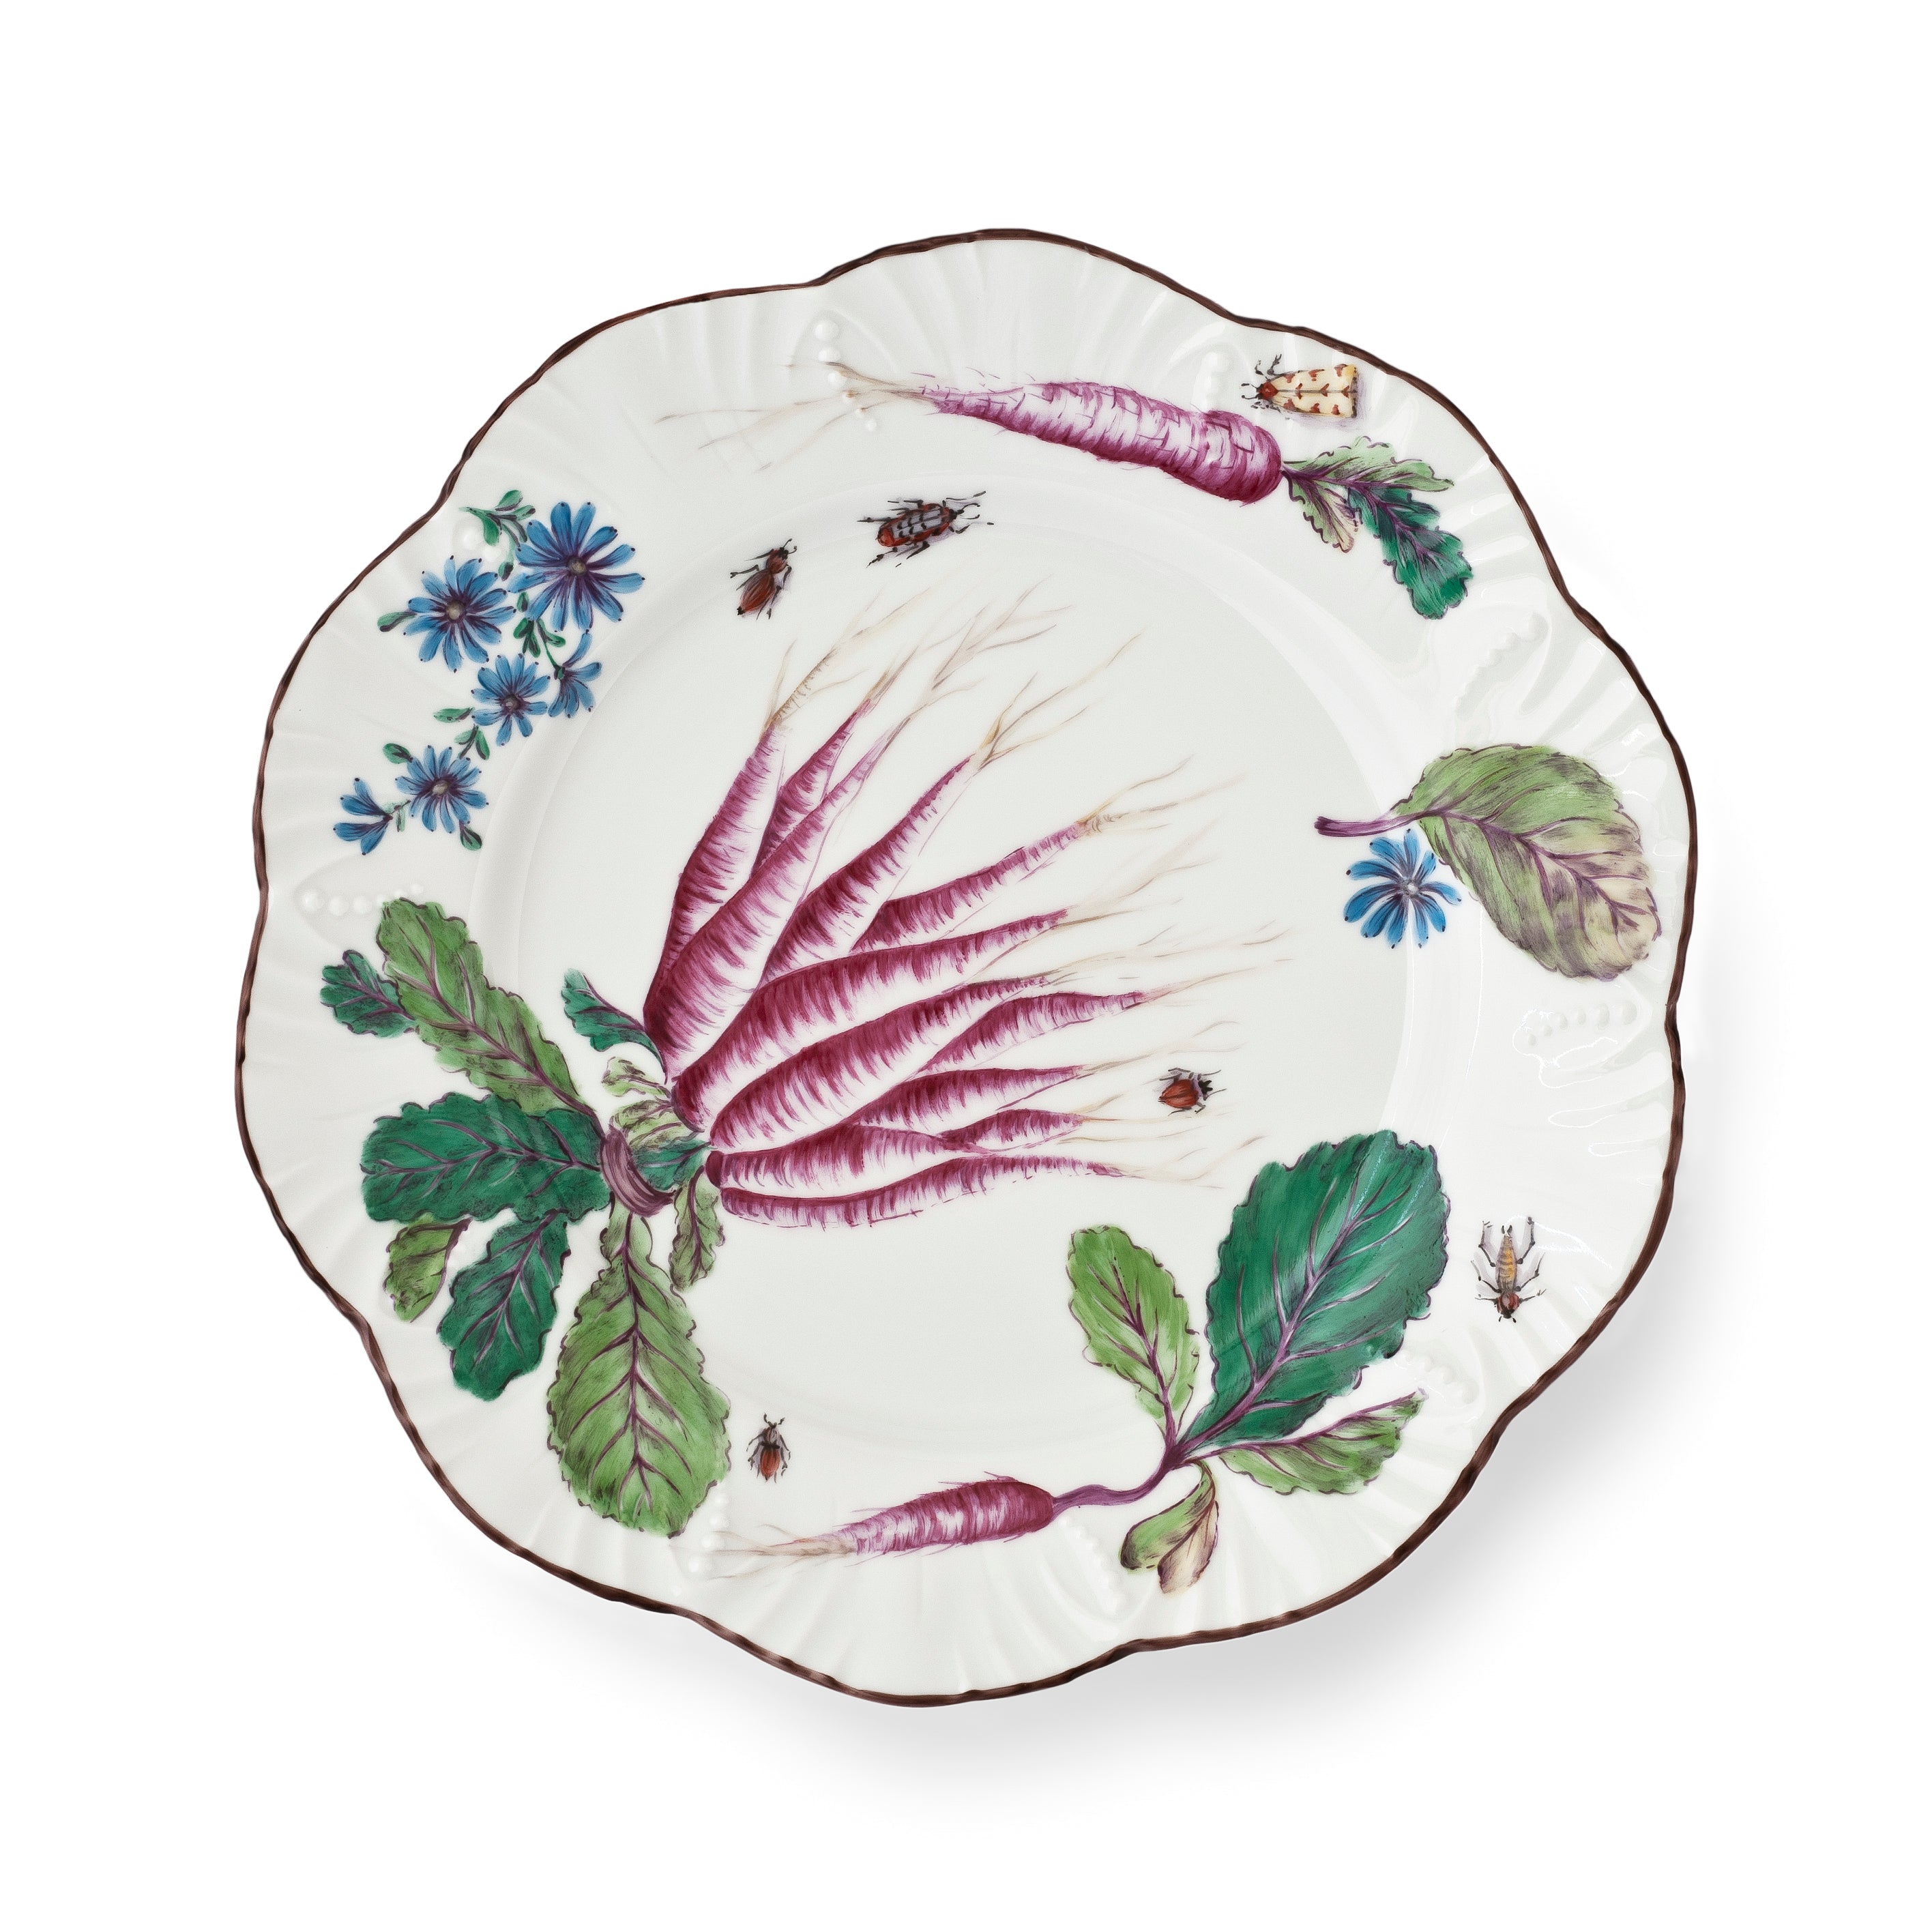 Feuillages - Dinner plate 06